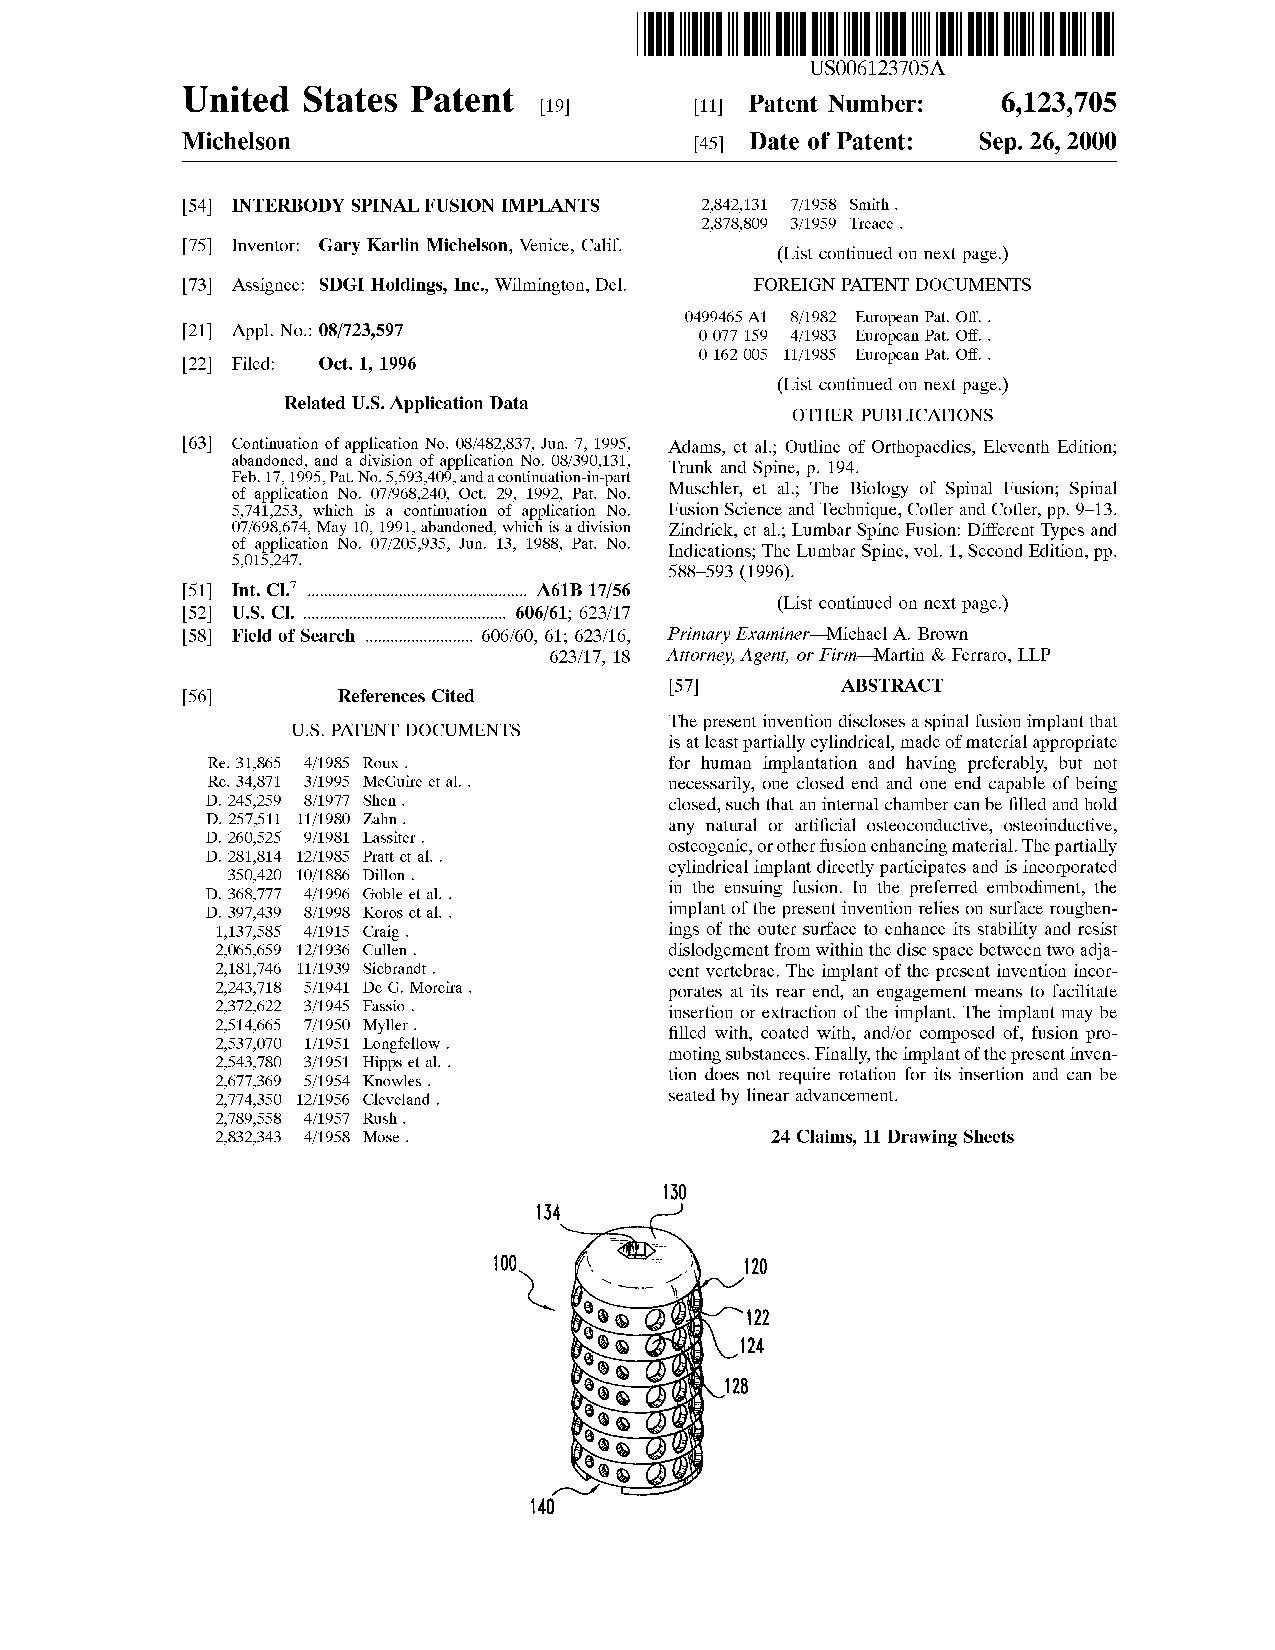 Interbody spinal fusion implants - Patent 6,123,705